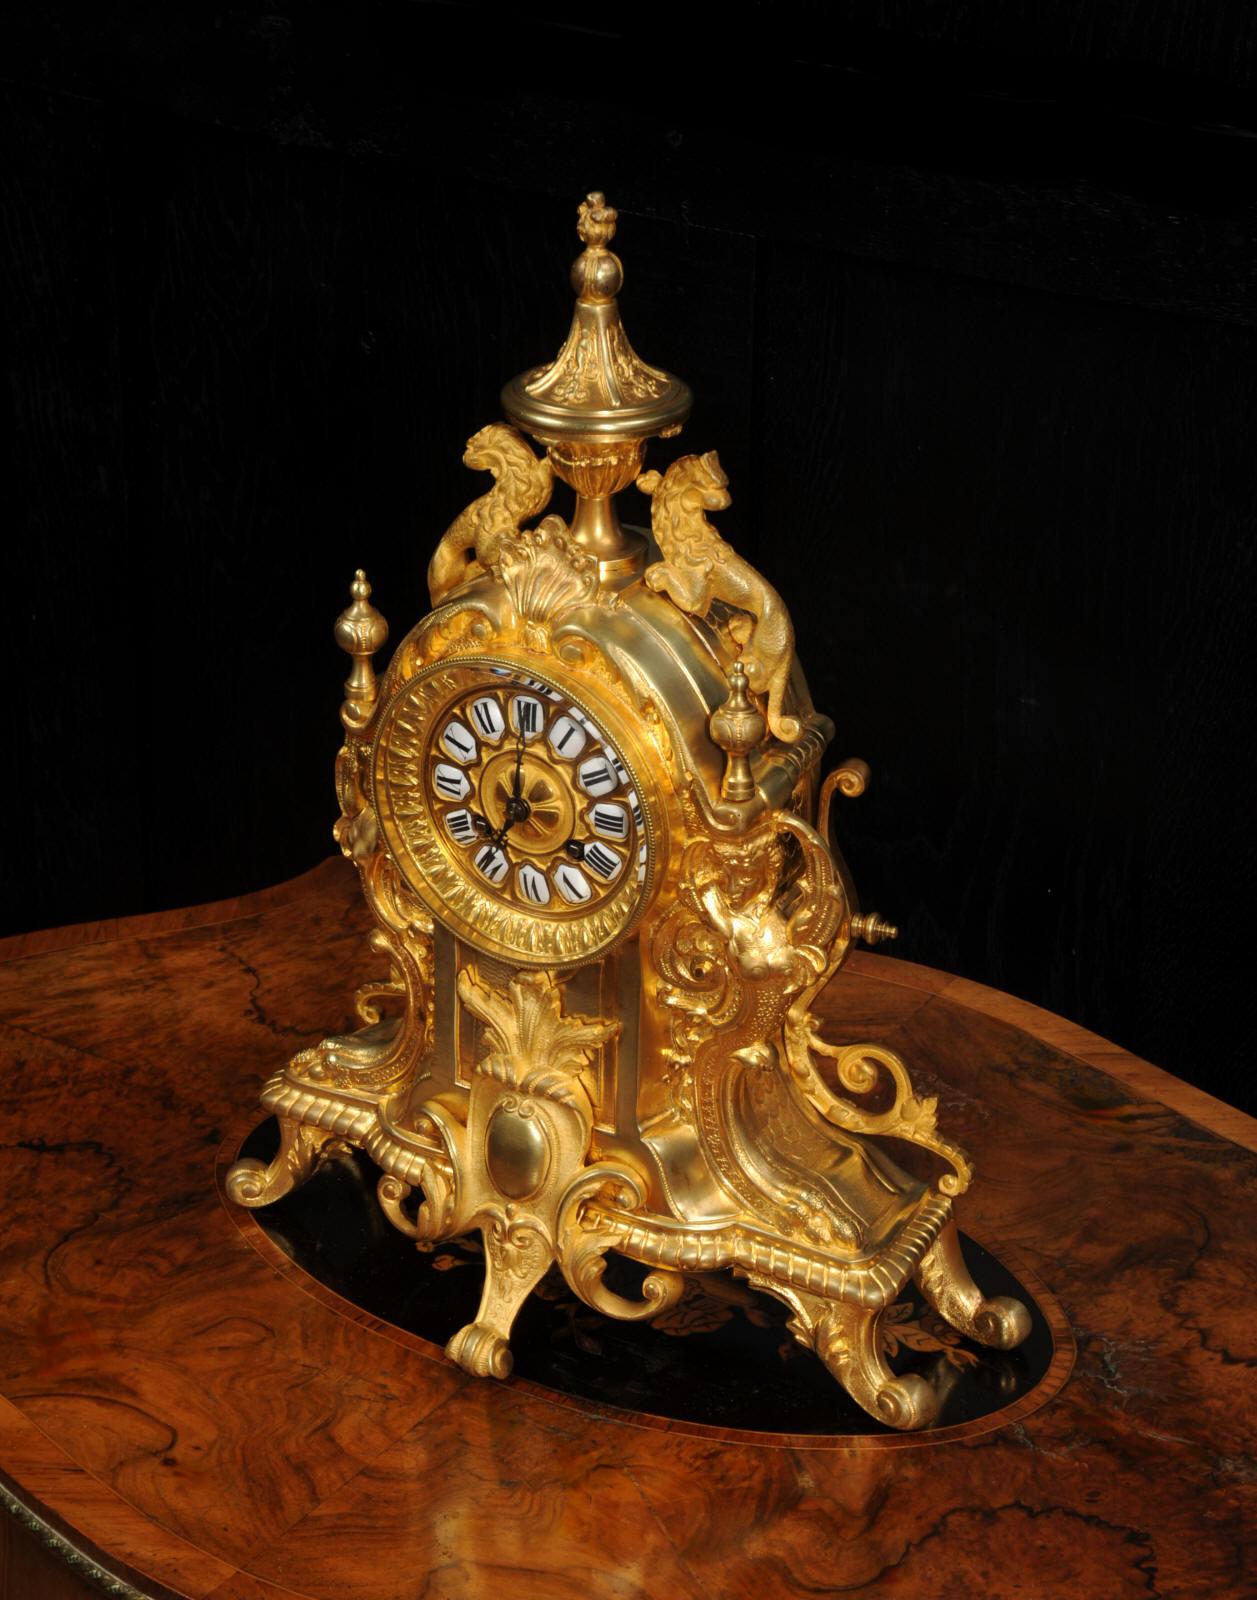 Antique French Ormolu Clock - Lions Rampant - overhauled and tested For Sale 3